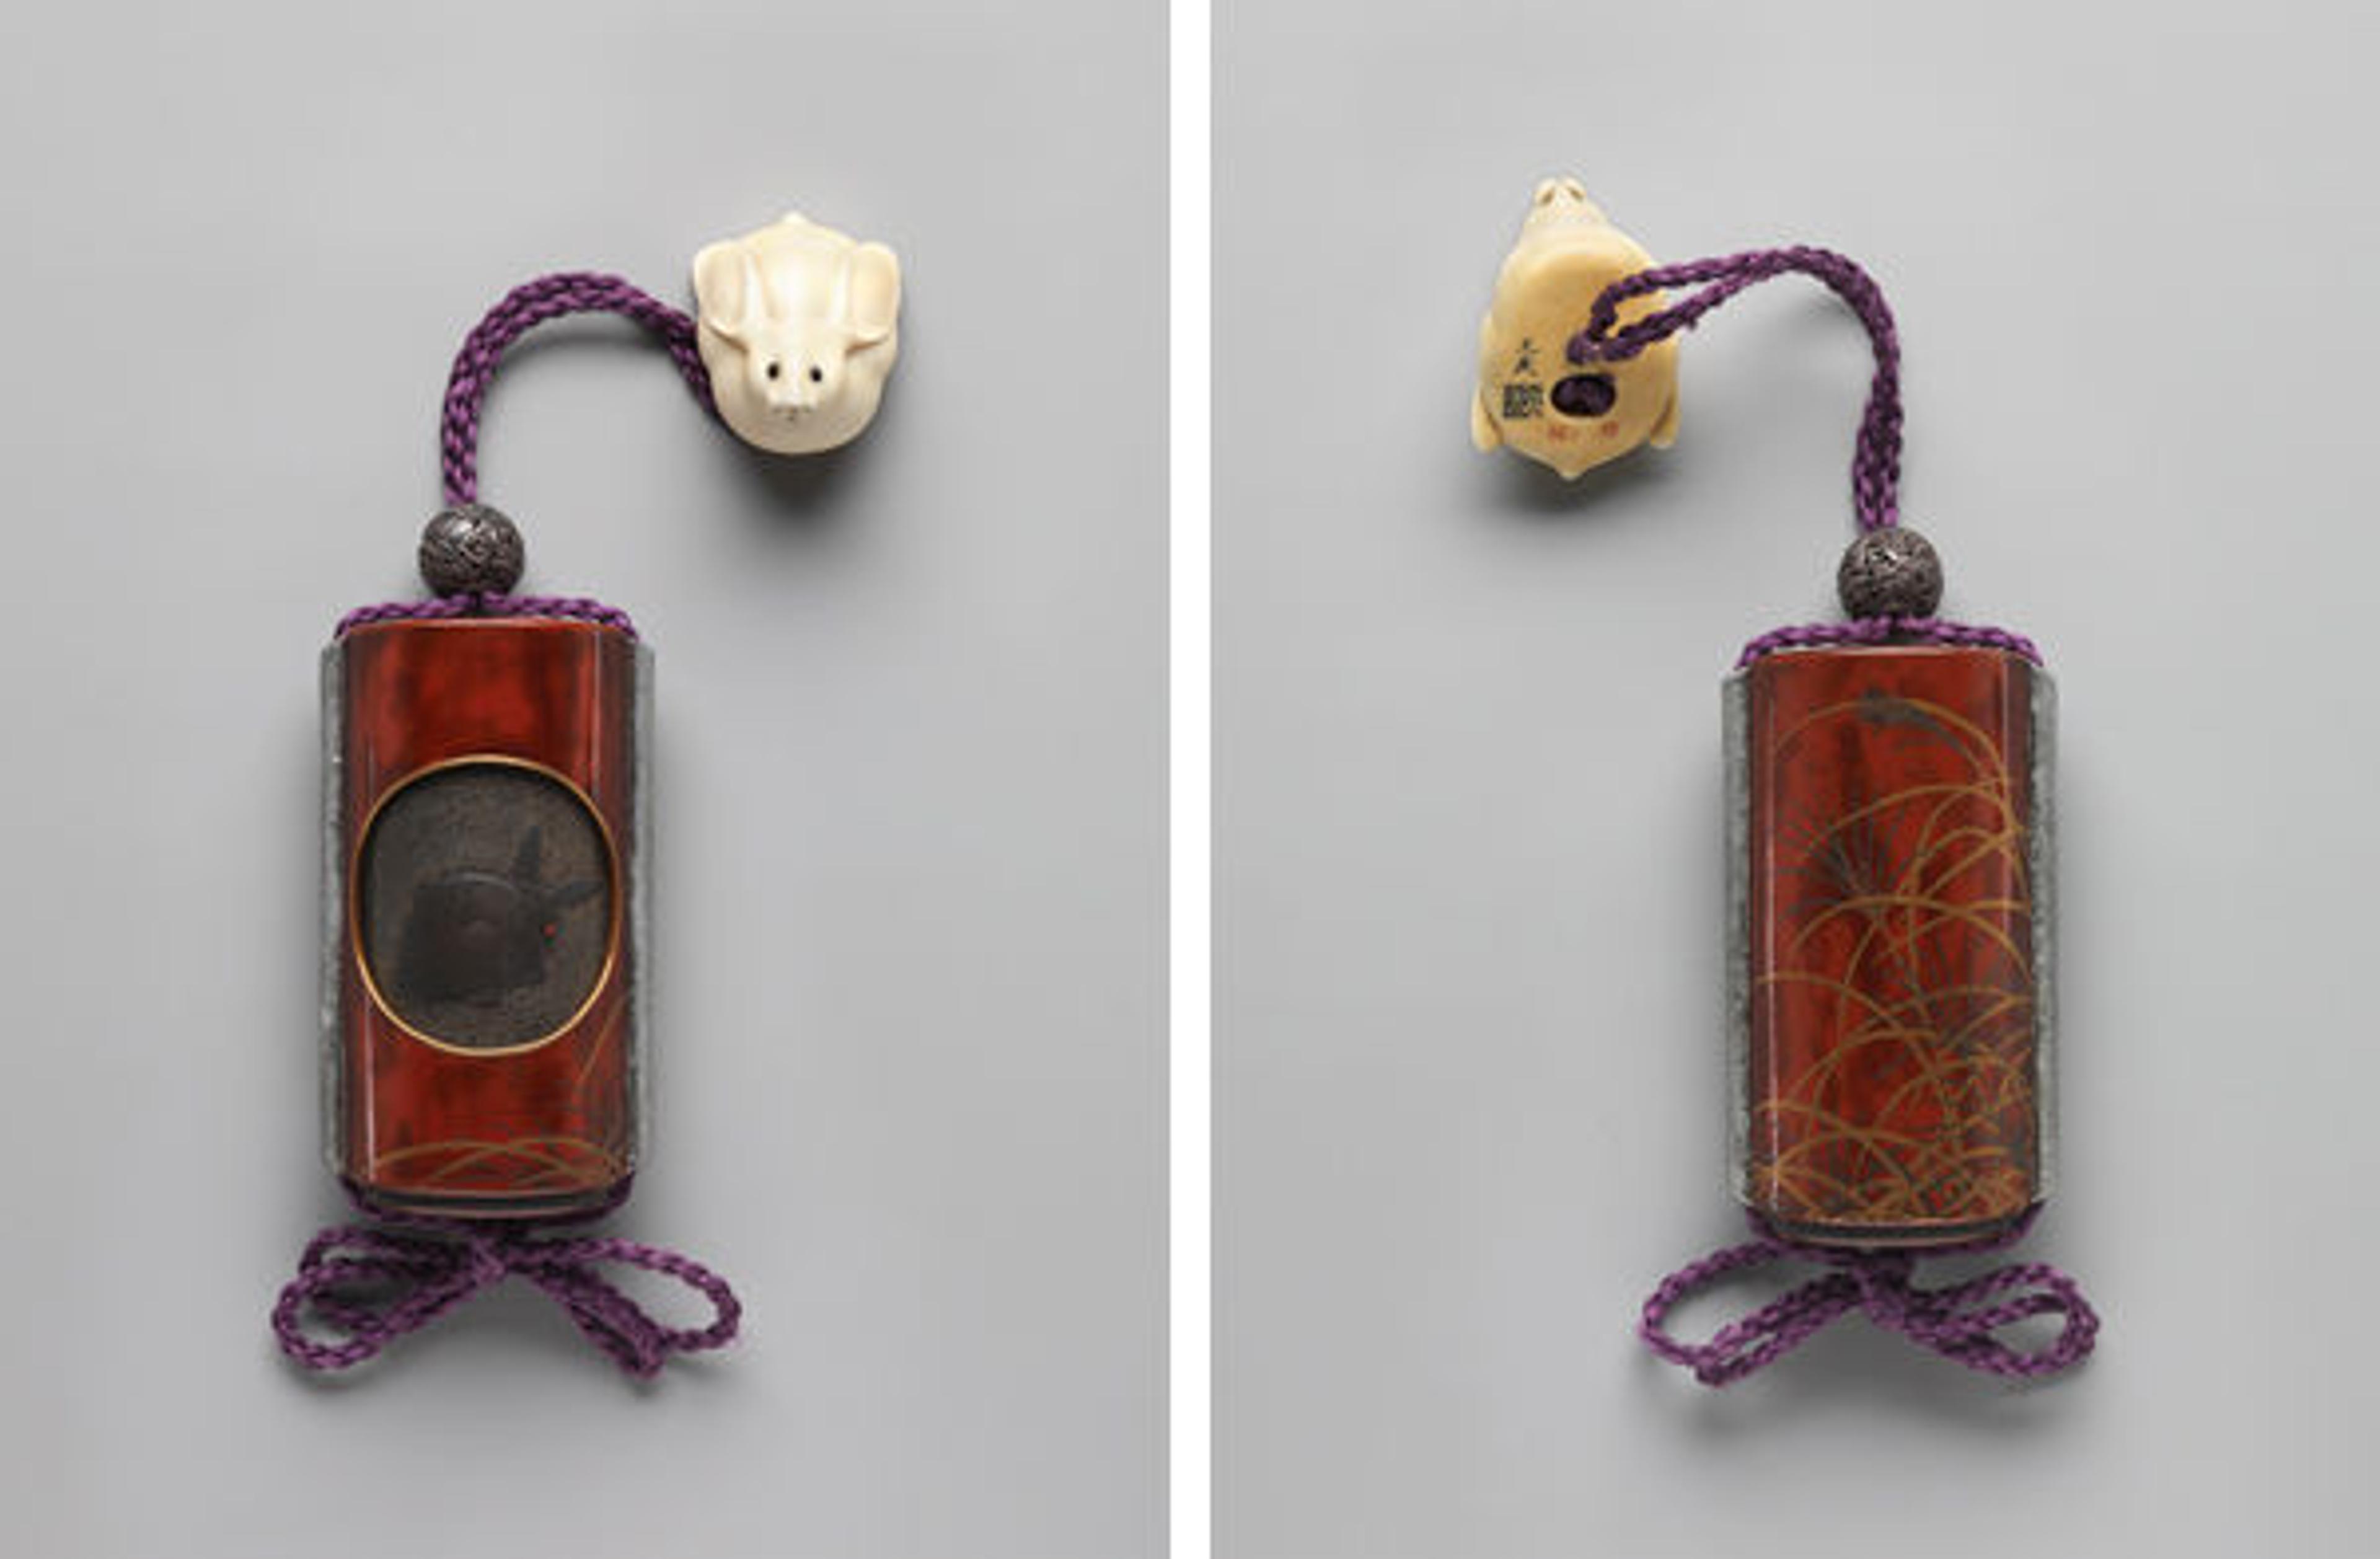 Case Inrō with Design of Rabbit in the Moon and Eulalia Grass, mid-19th century (front and back views) | 38.25.128